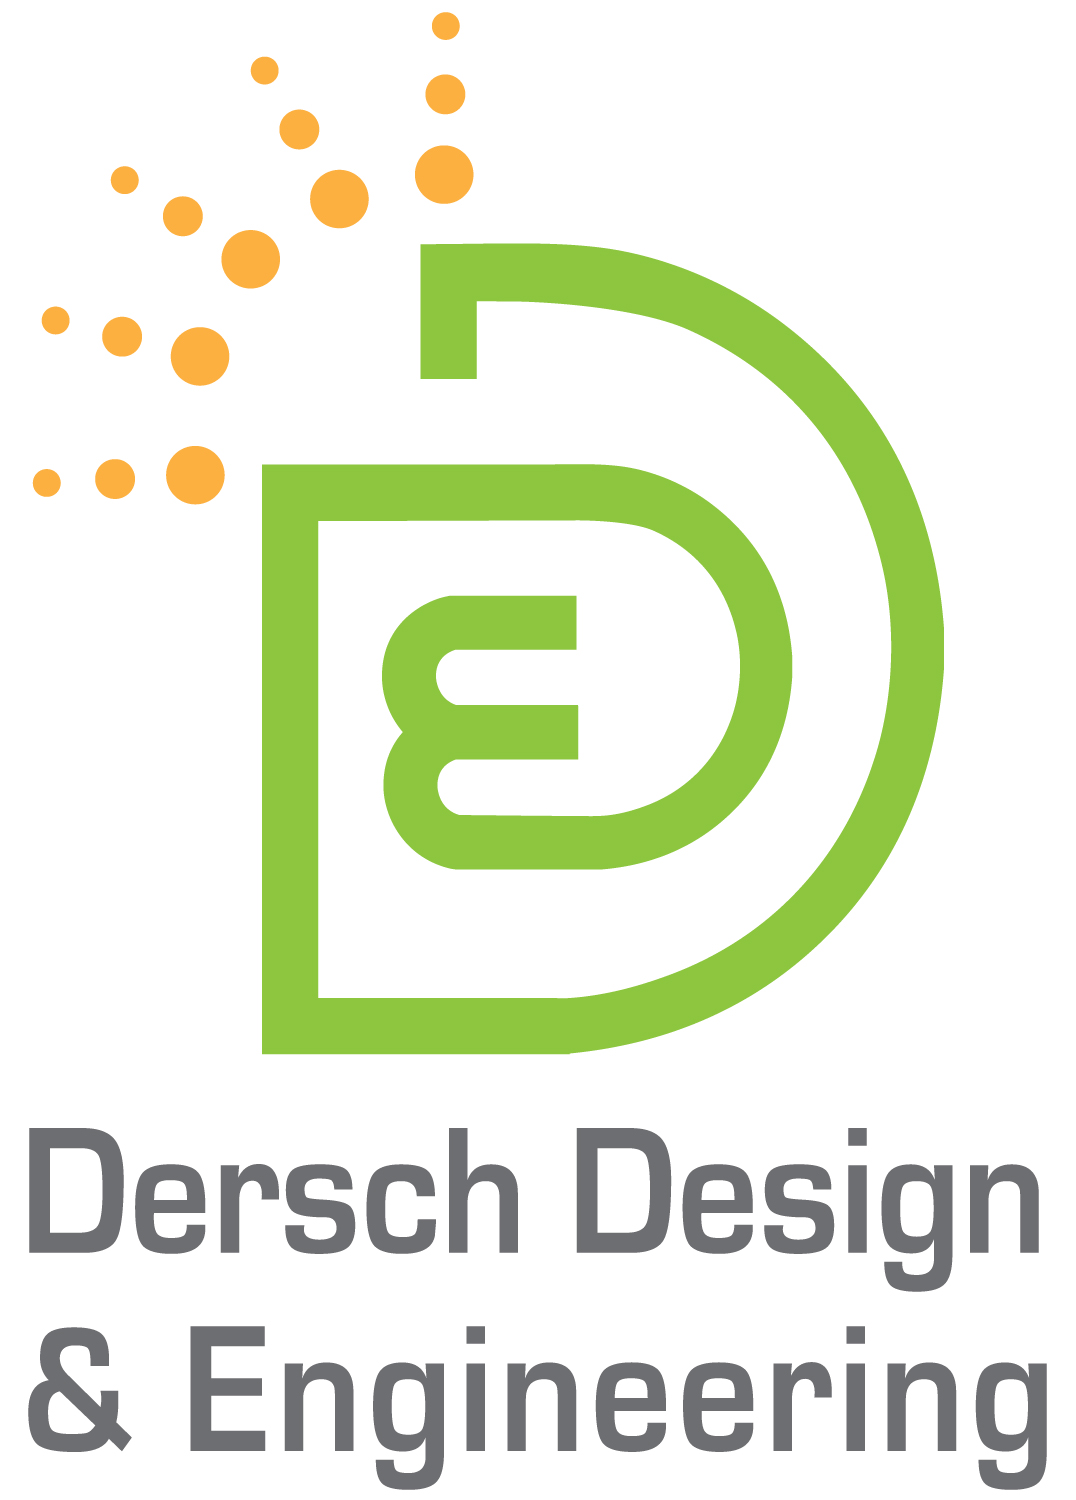 Dersch Design & Engineering specializes in electrical engineering, building construction / renovation, renewable energy, and microgrids.